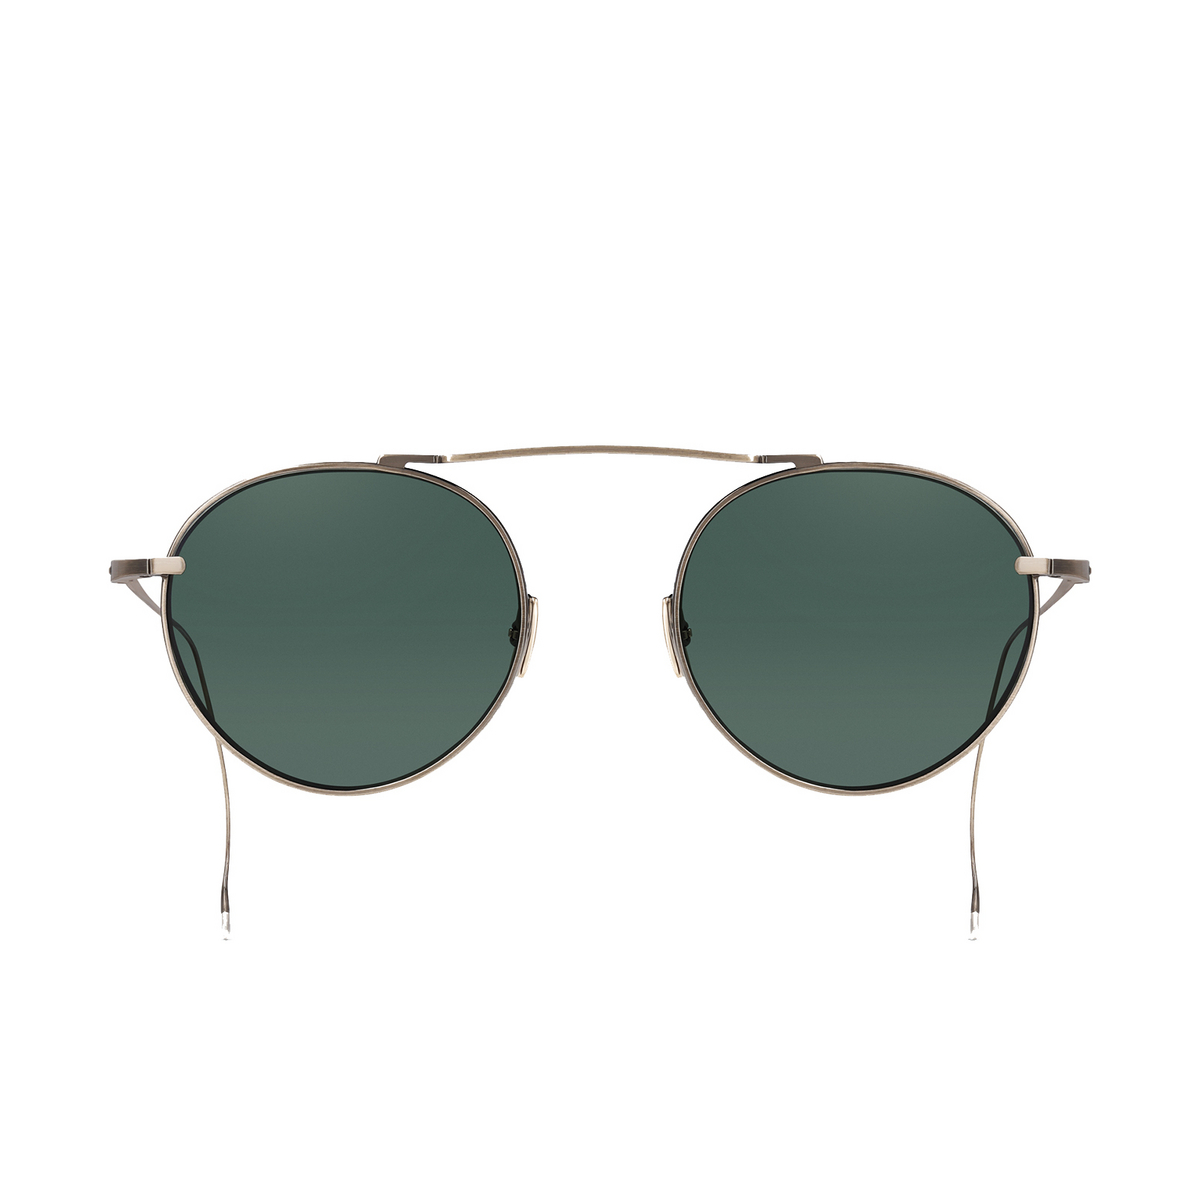 Mr. Leight® Aviator Sunglasses: Rei S color ATG/G15 - front view.